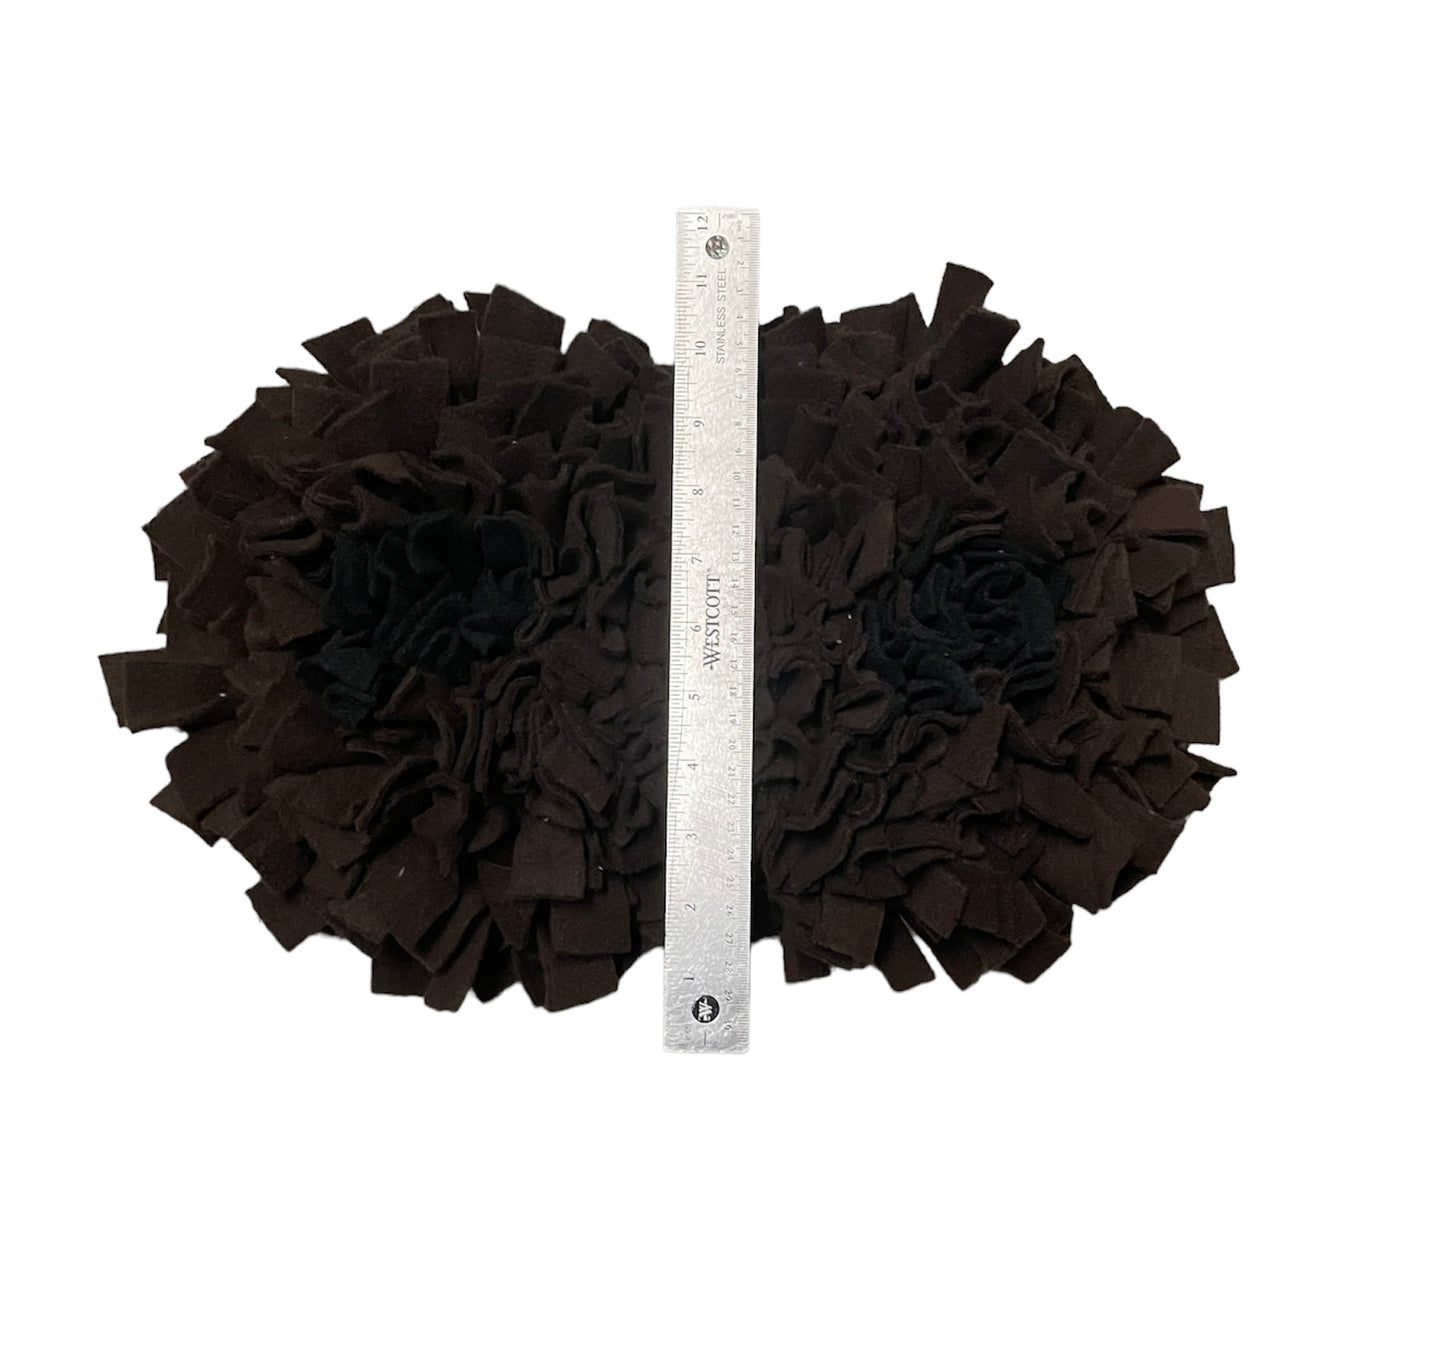 Snuffle mat ADULT Boobs - light and dark skin tone dog toy